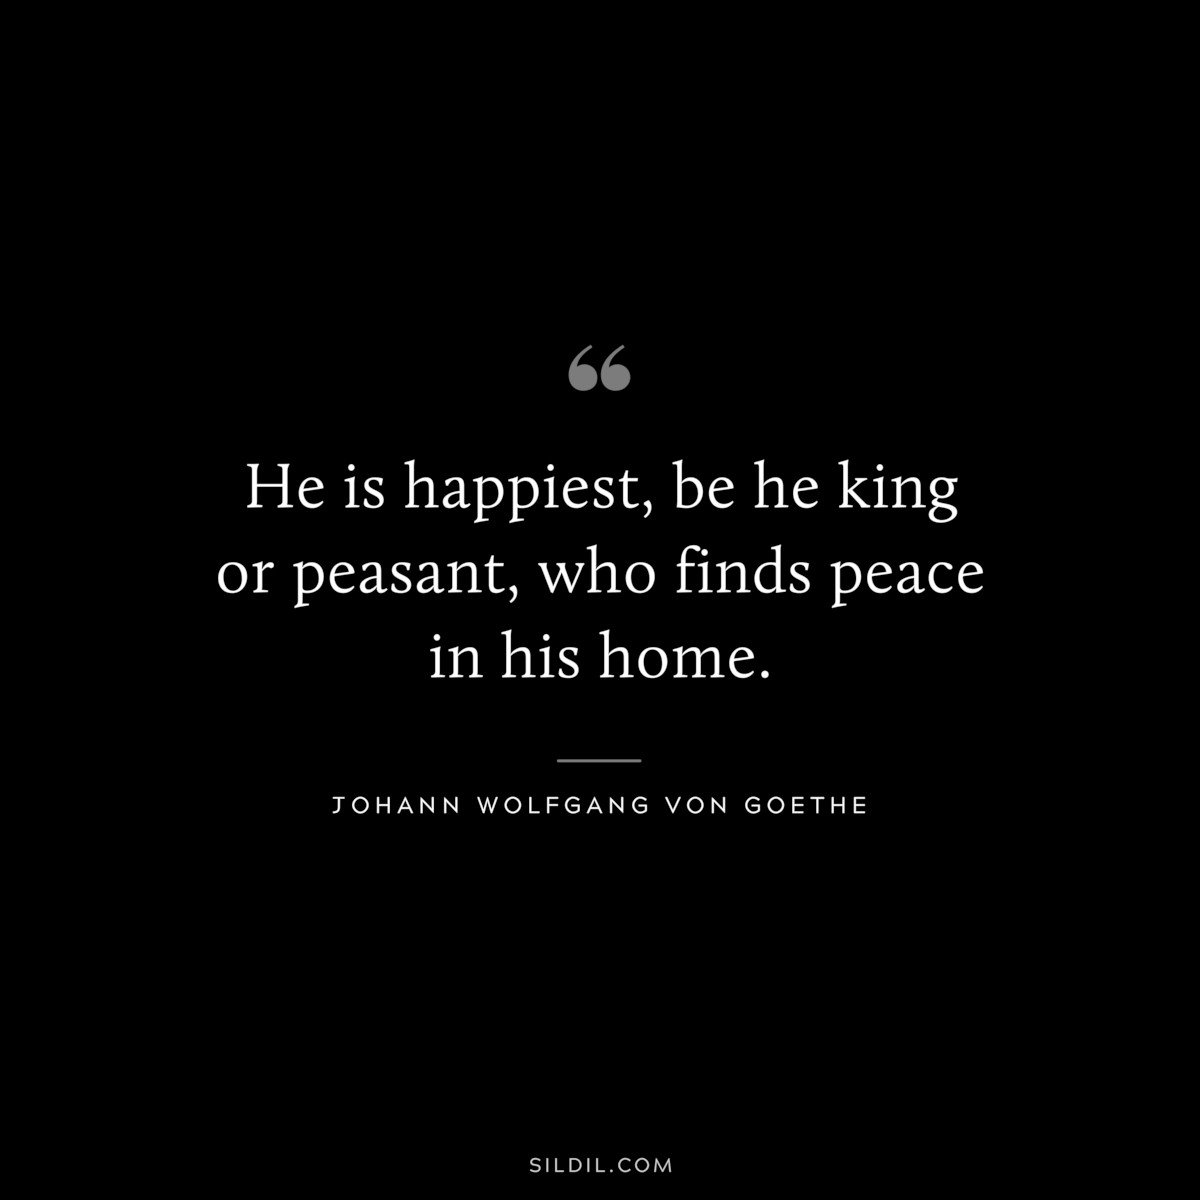 He is happiest, be he king or peasant, who finds peace in his home.― Johann Wolfgang von Goethe